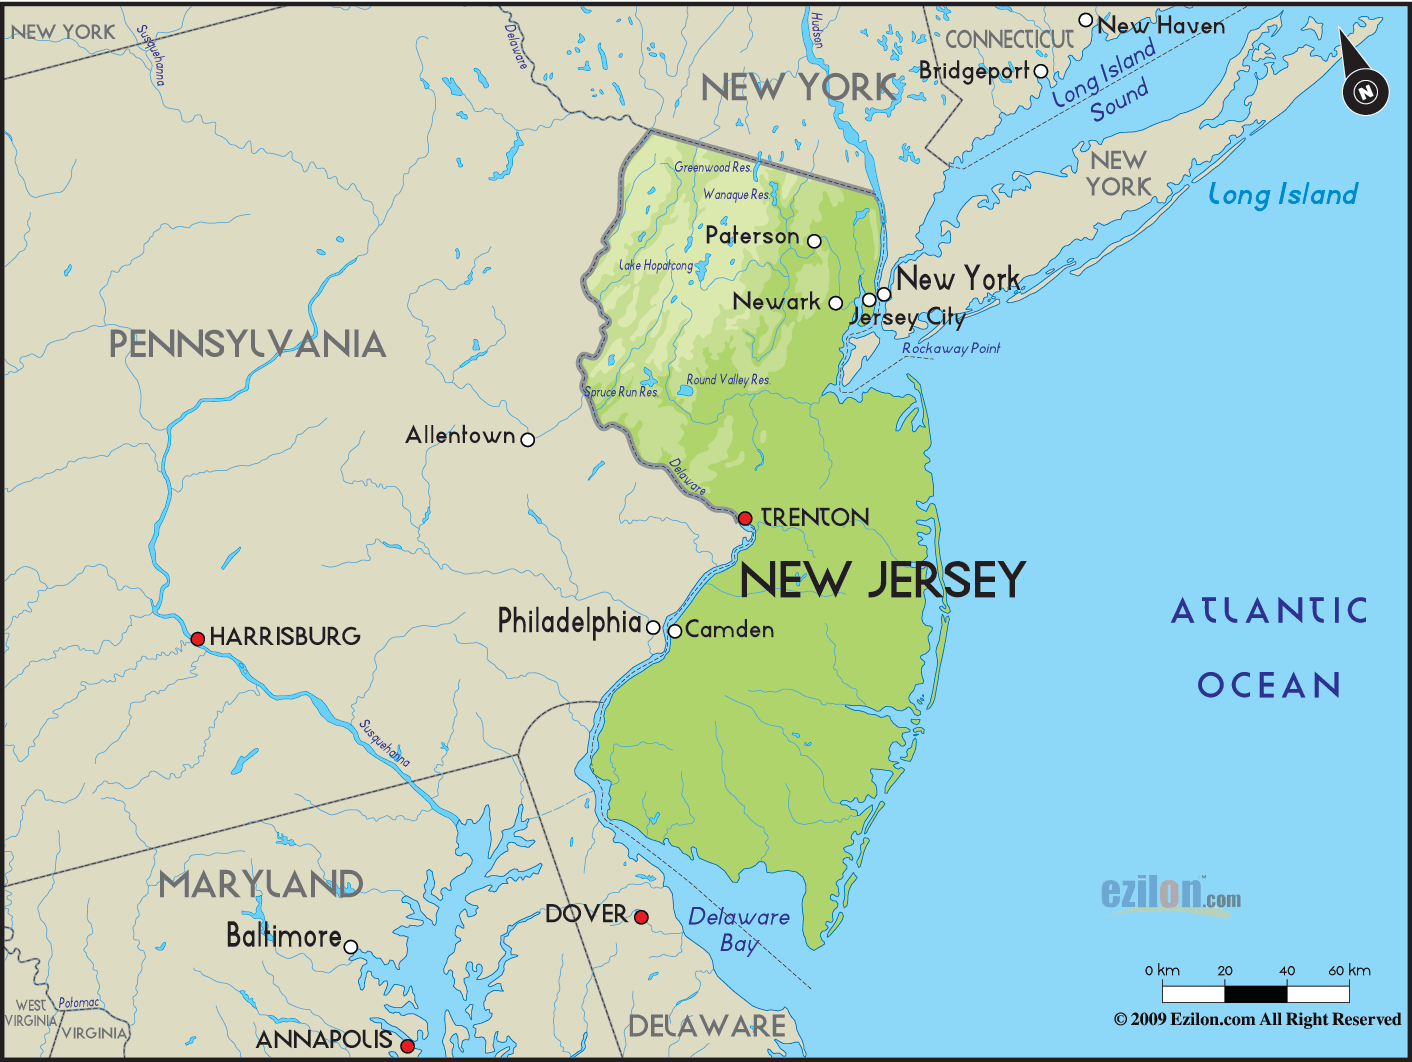 Awesome New Jersey Map New Jersey Jersey Delaware Bay